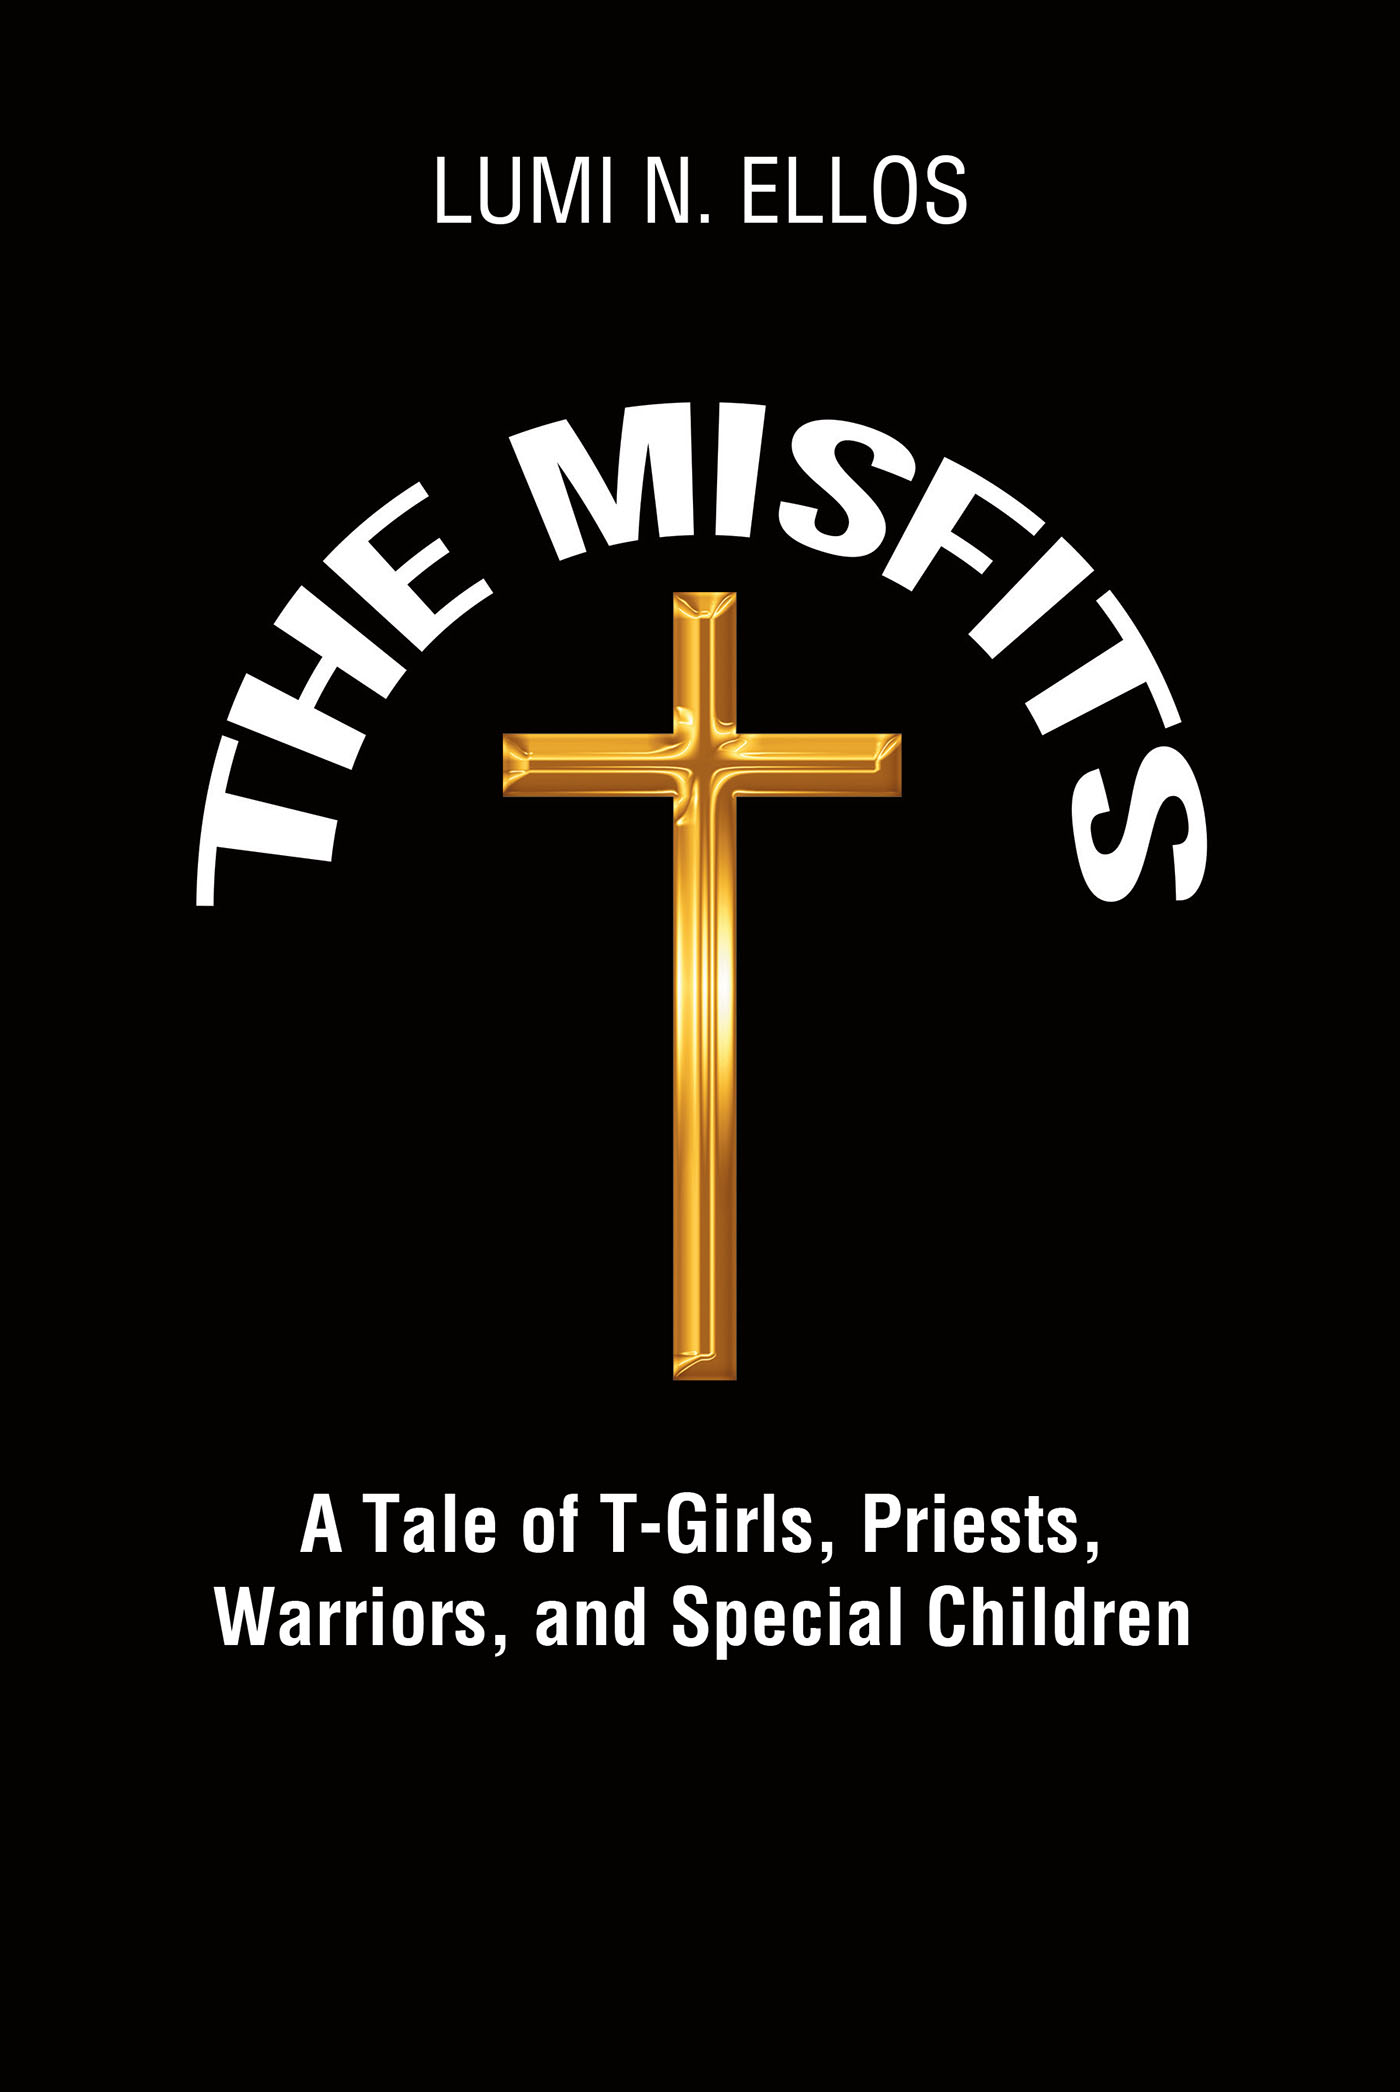 "The Misfits, A Tale of T-Girls, Priests, Warriors, and Special Children," by Lumi N. Ellos, is a Love Story Based Around a Child Who Transitions from Male to Female